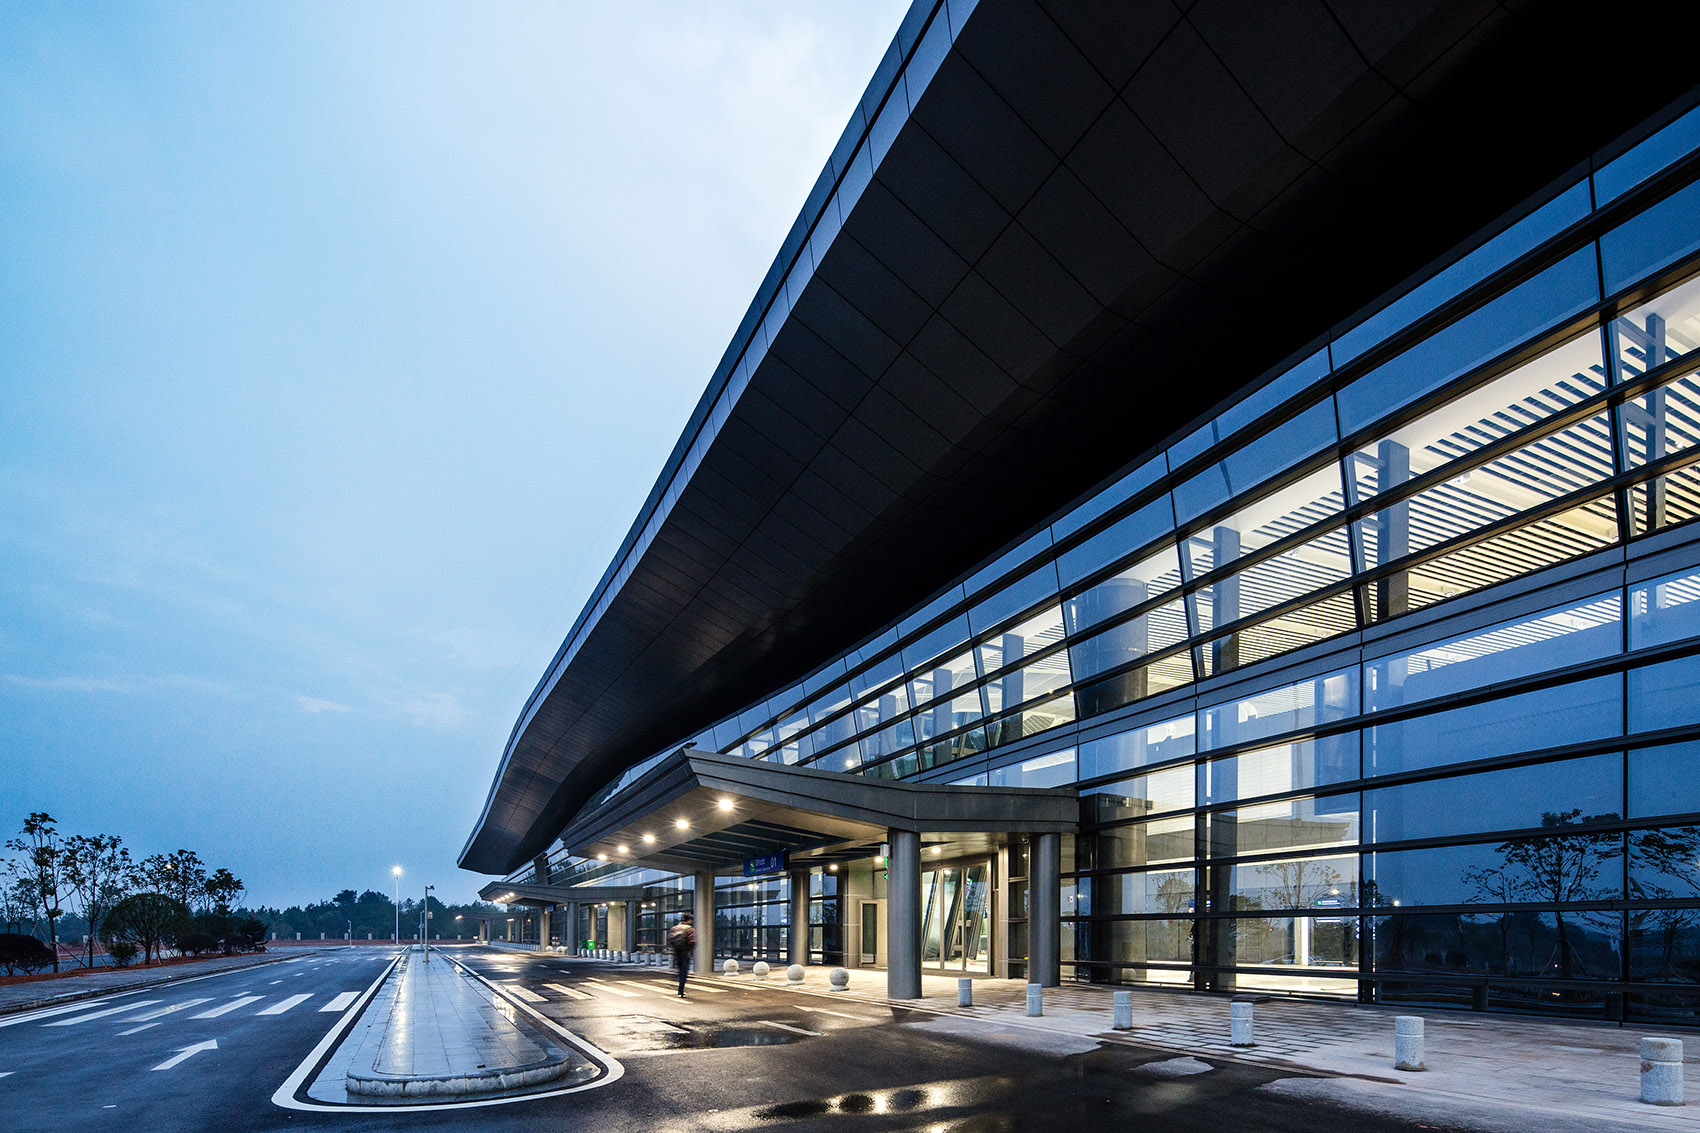 03.Interior-Design-Of-Shangrao-Sanqingshan-Airport-by-GRAND-WISD.jpg